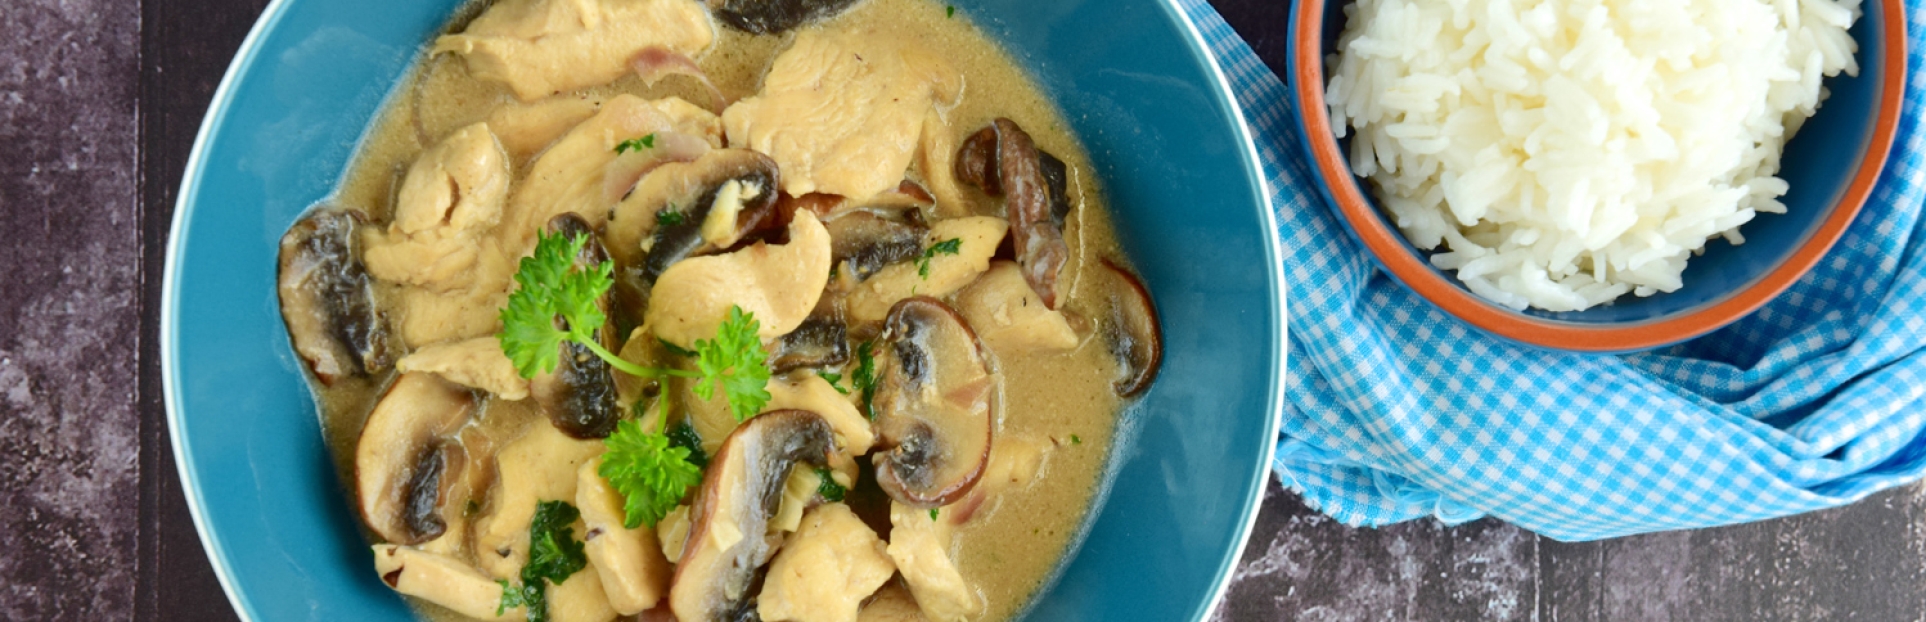 an image of creamy chicken with rice mushrooms in bowls